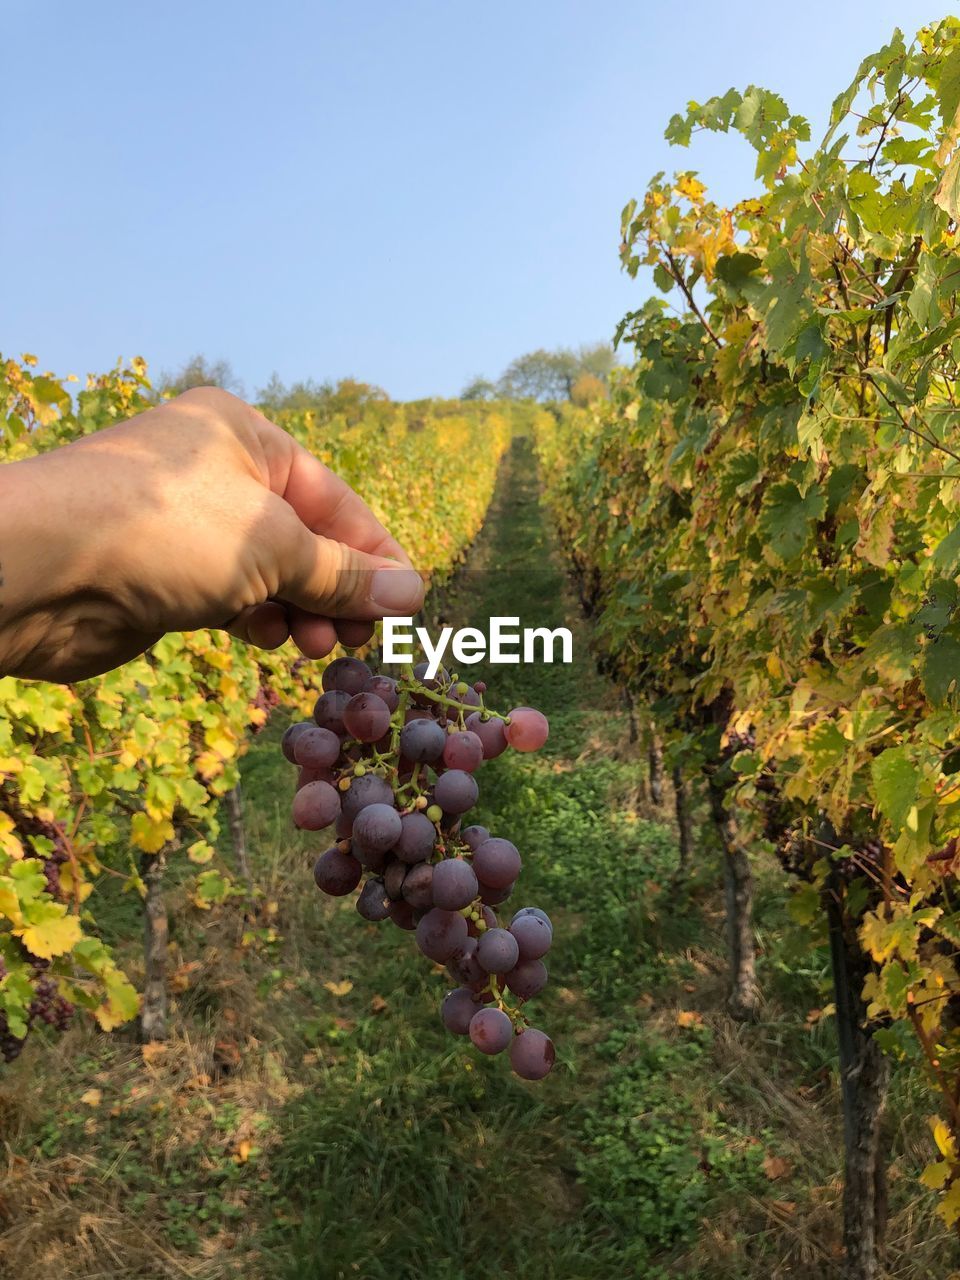 CROPPED IMAGE OF PERSON HOLDING GRAPES